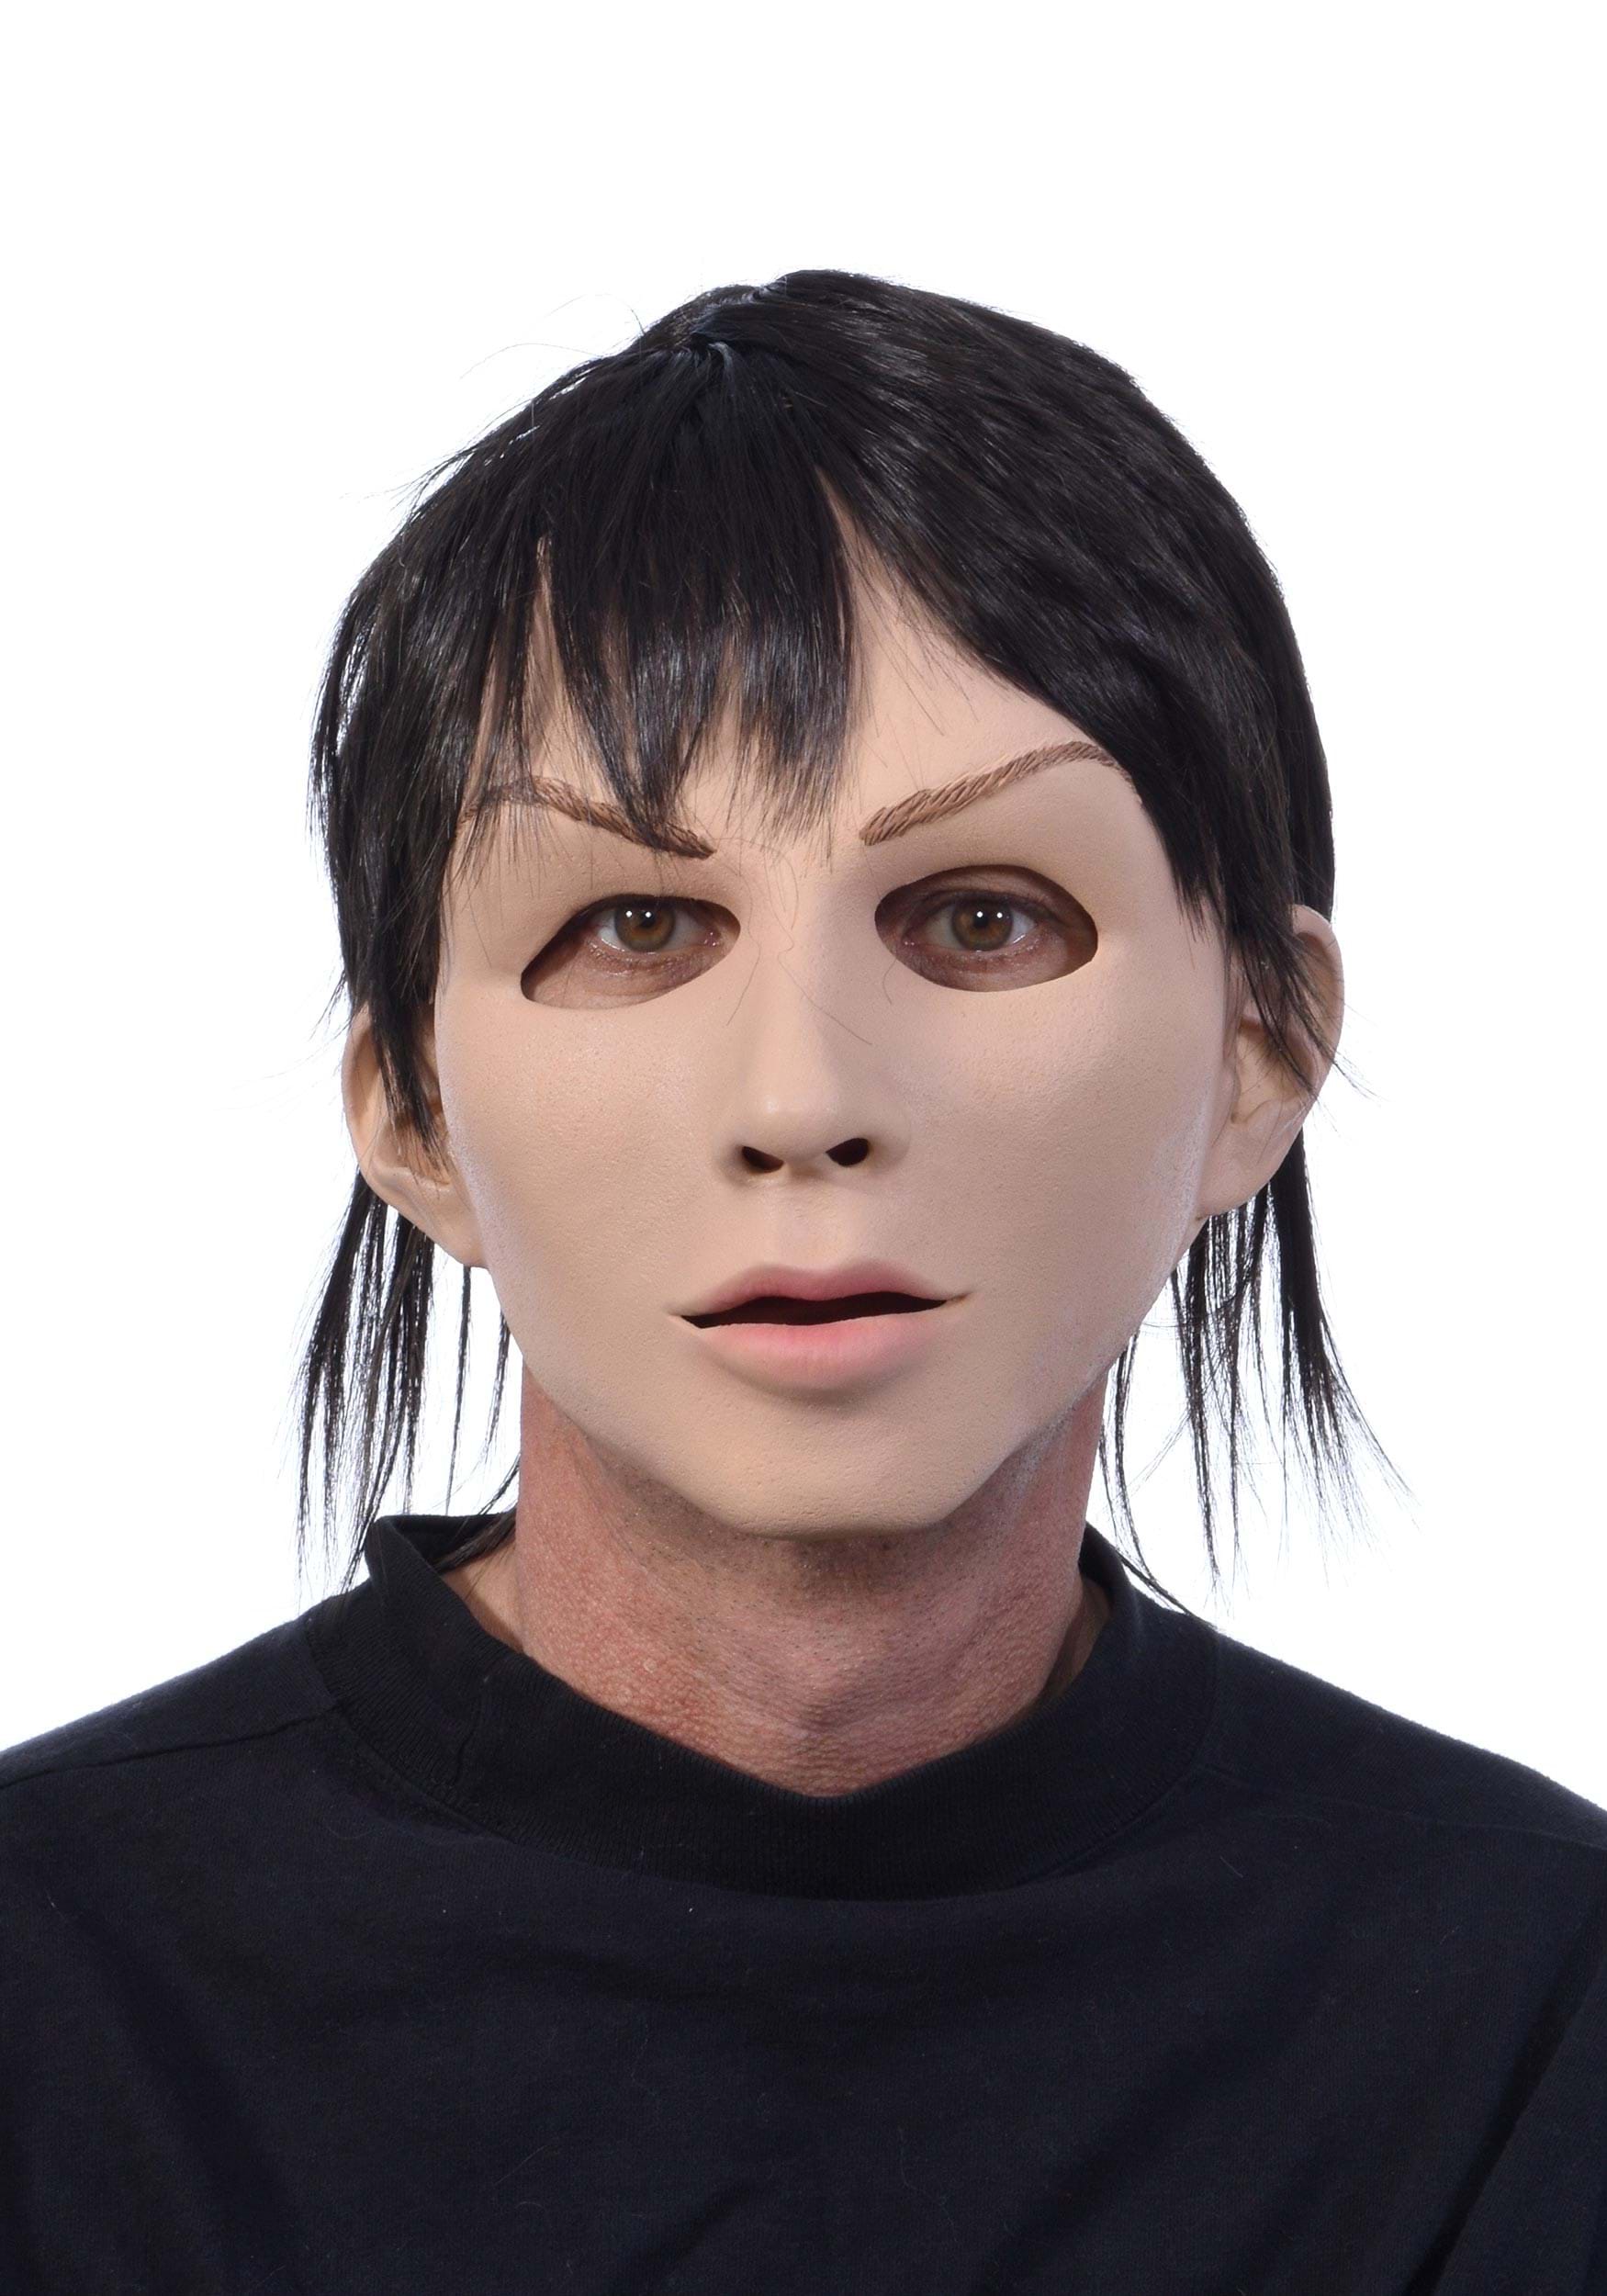 Image of Soft and Real Alex Mask for Adults ID ZAMK1009-ST